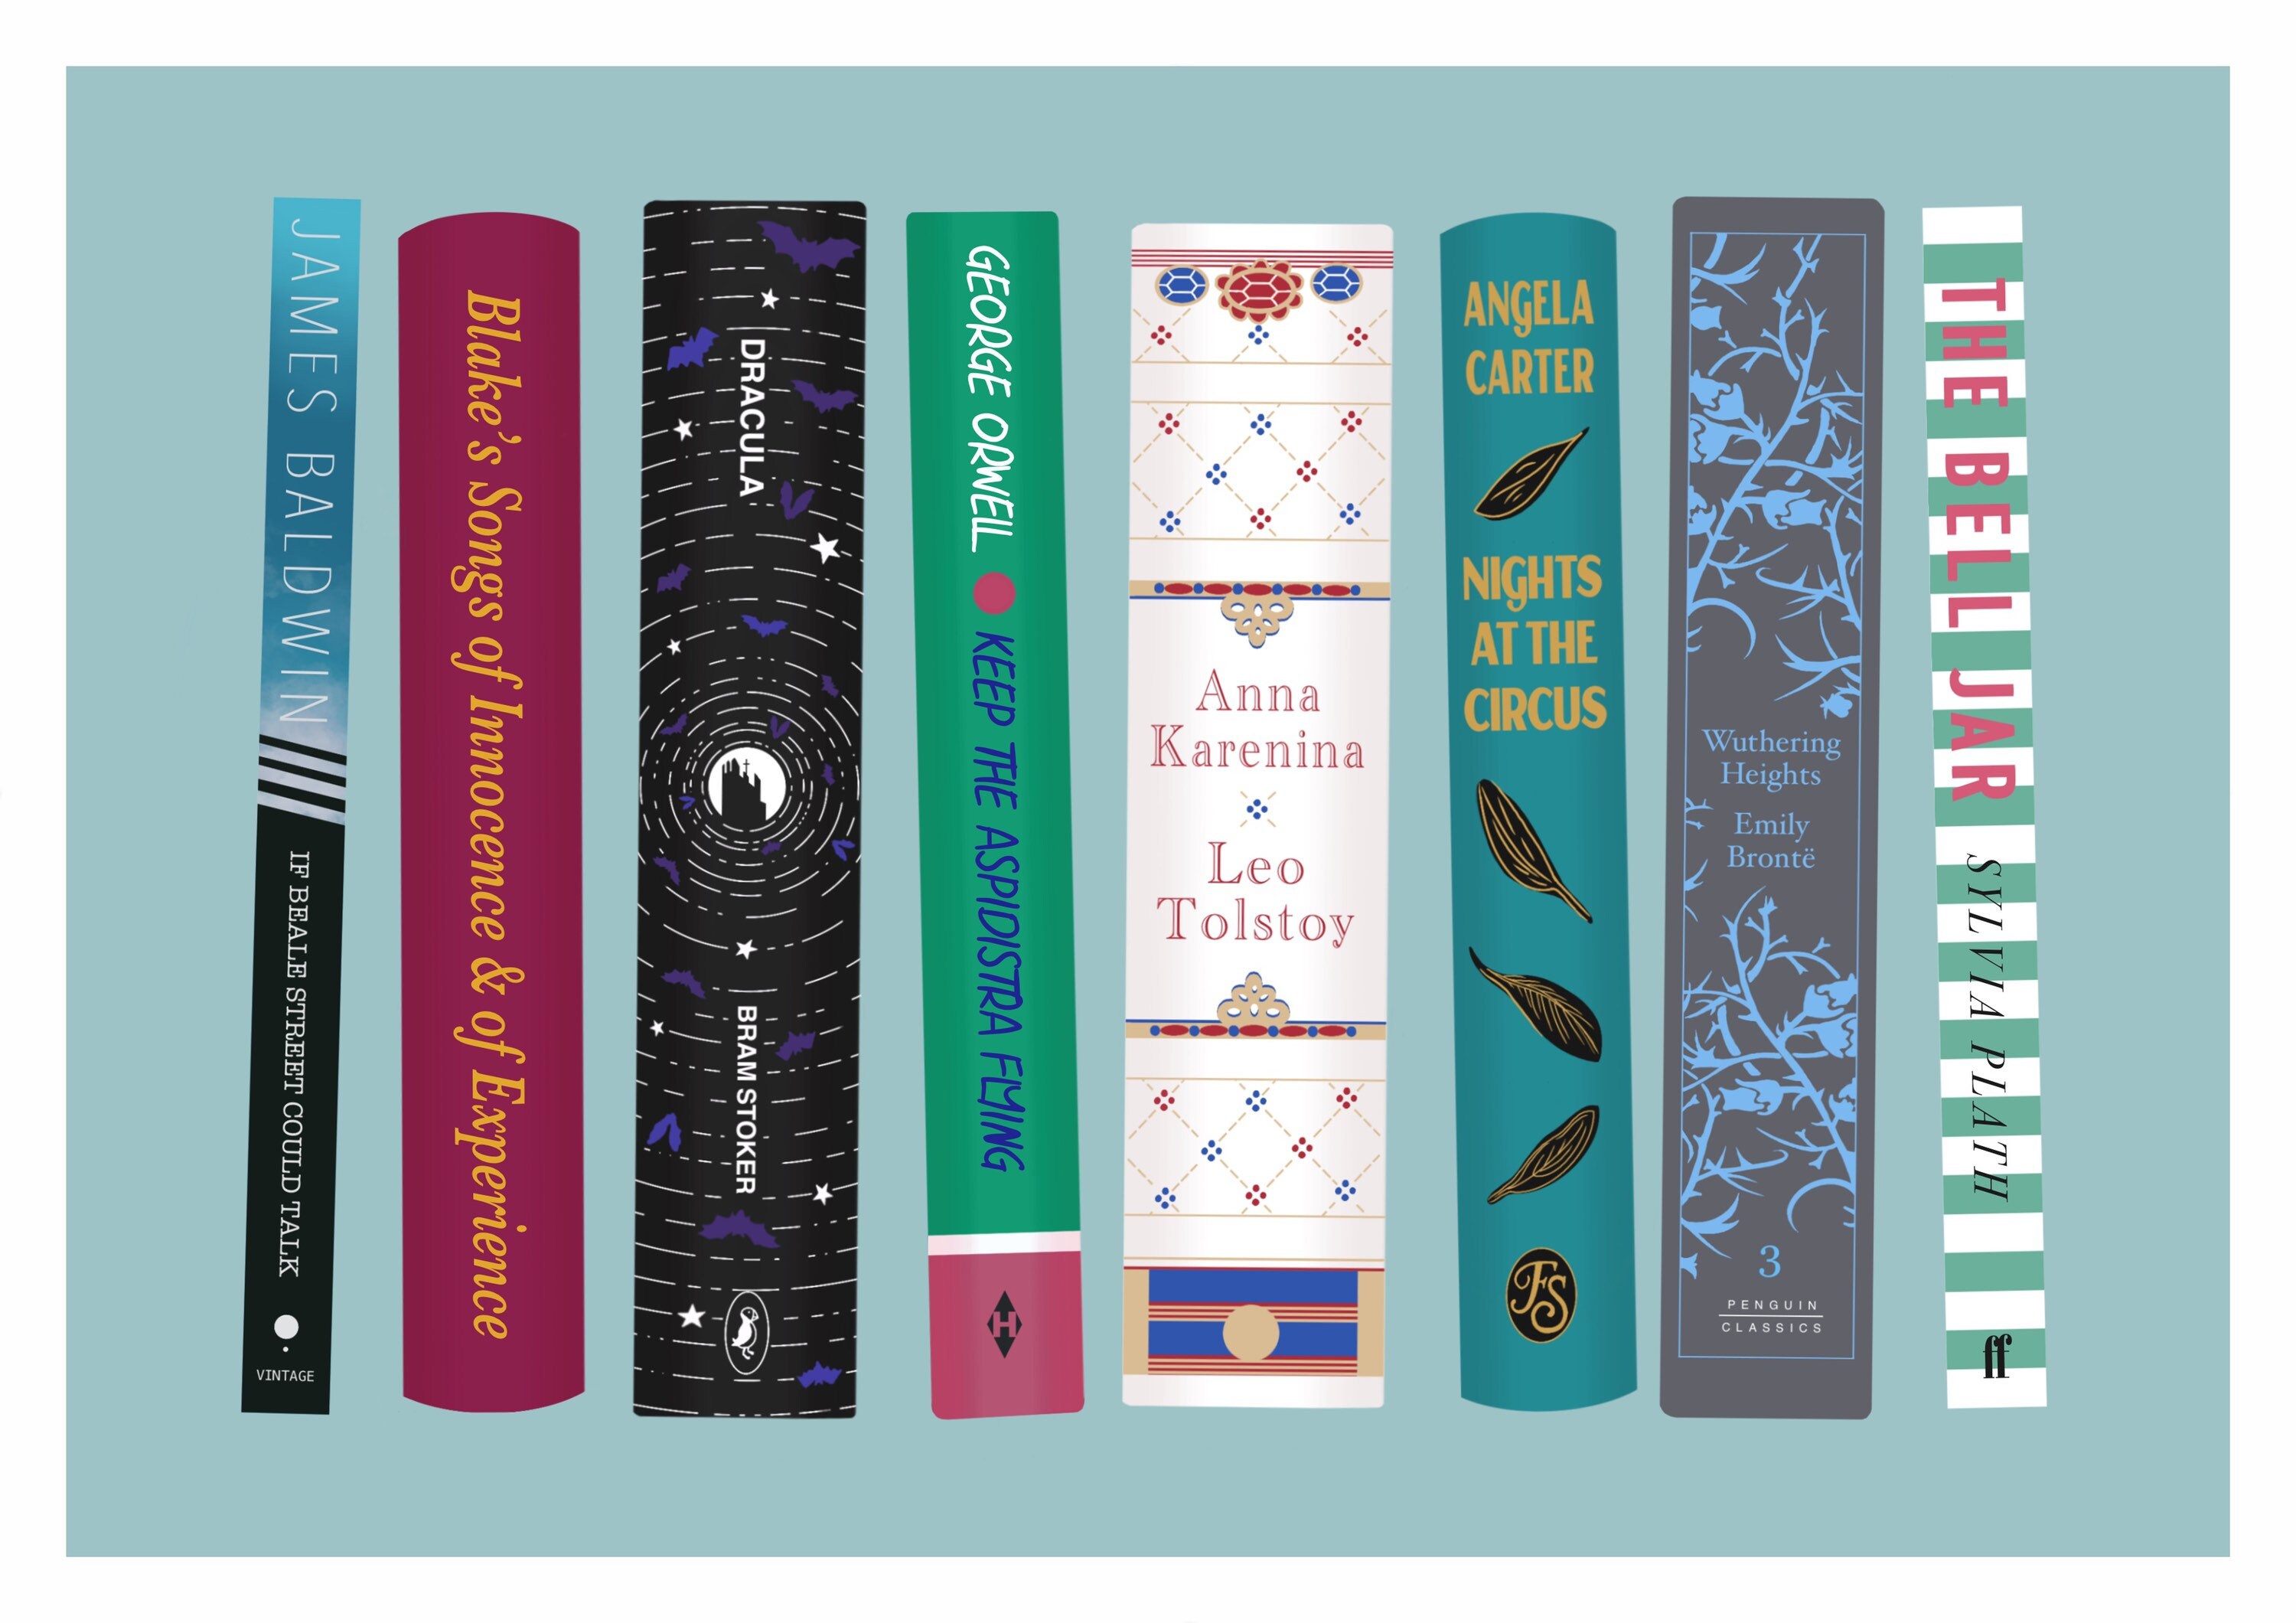 Pretty Book Spines Print Bookish Print Gifts for Book Lovers Gifts for  Bookworm Office Decor Book Print 